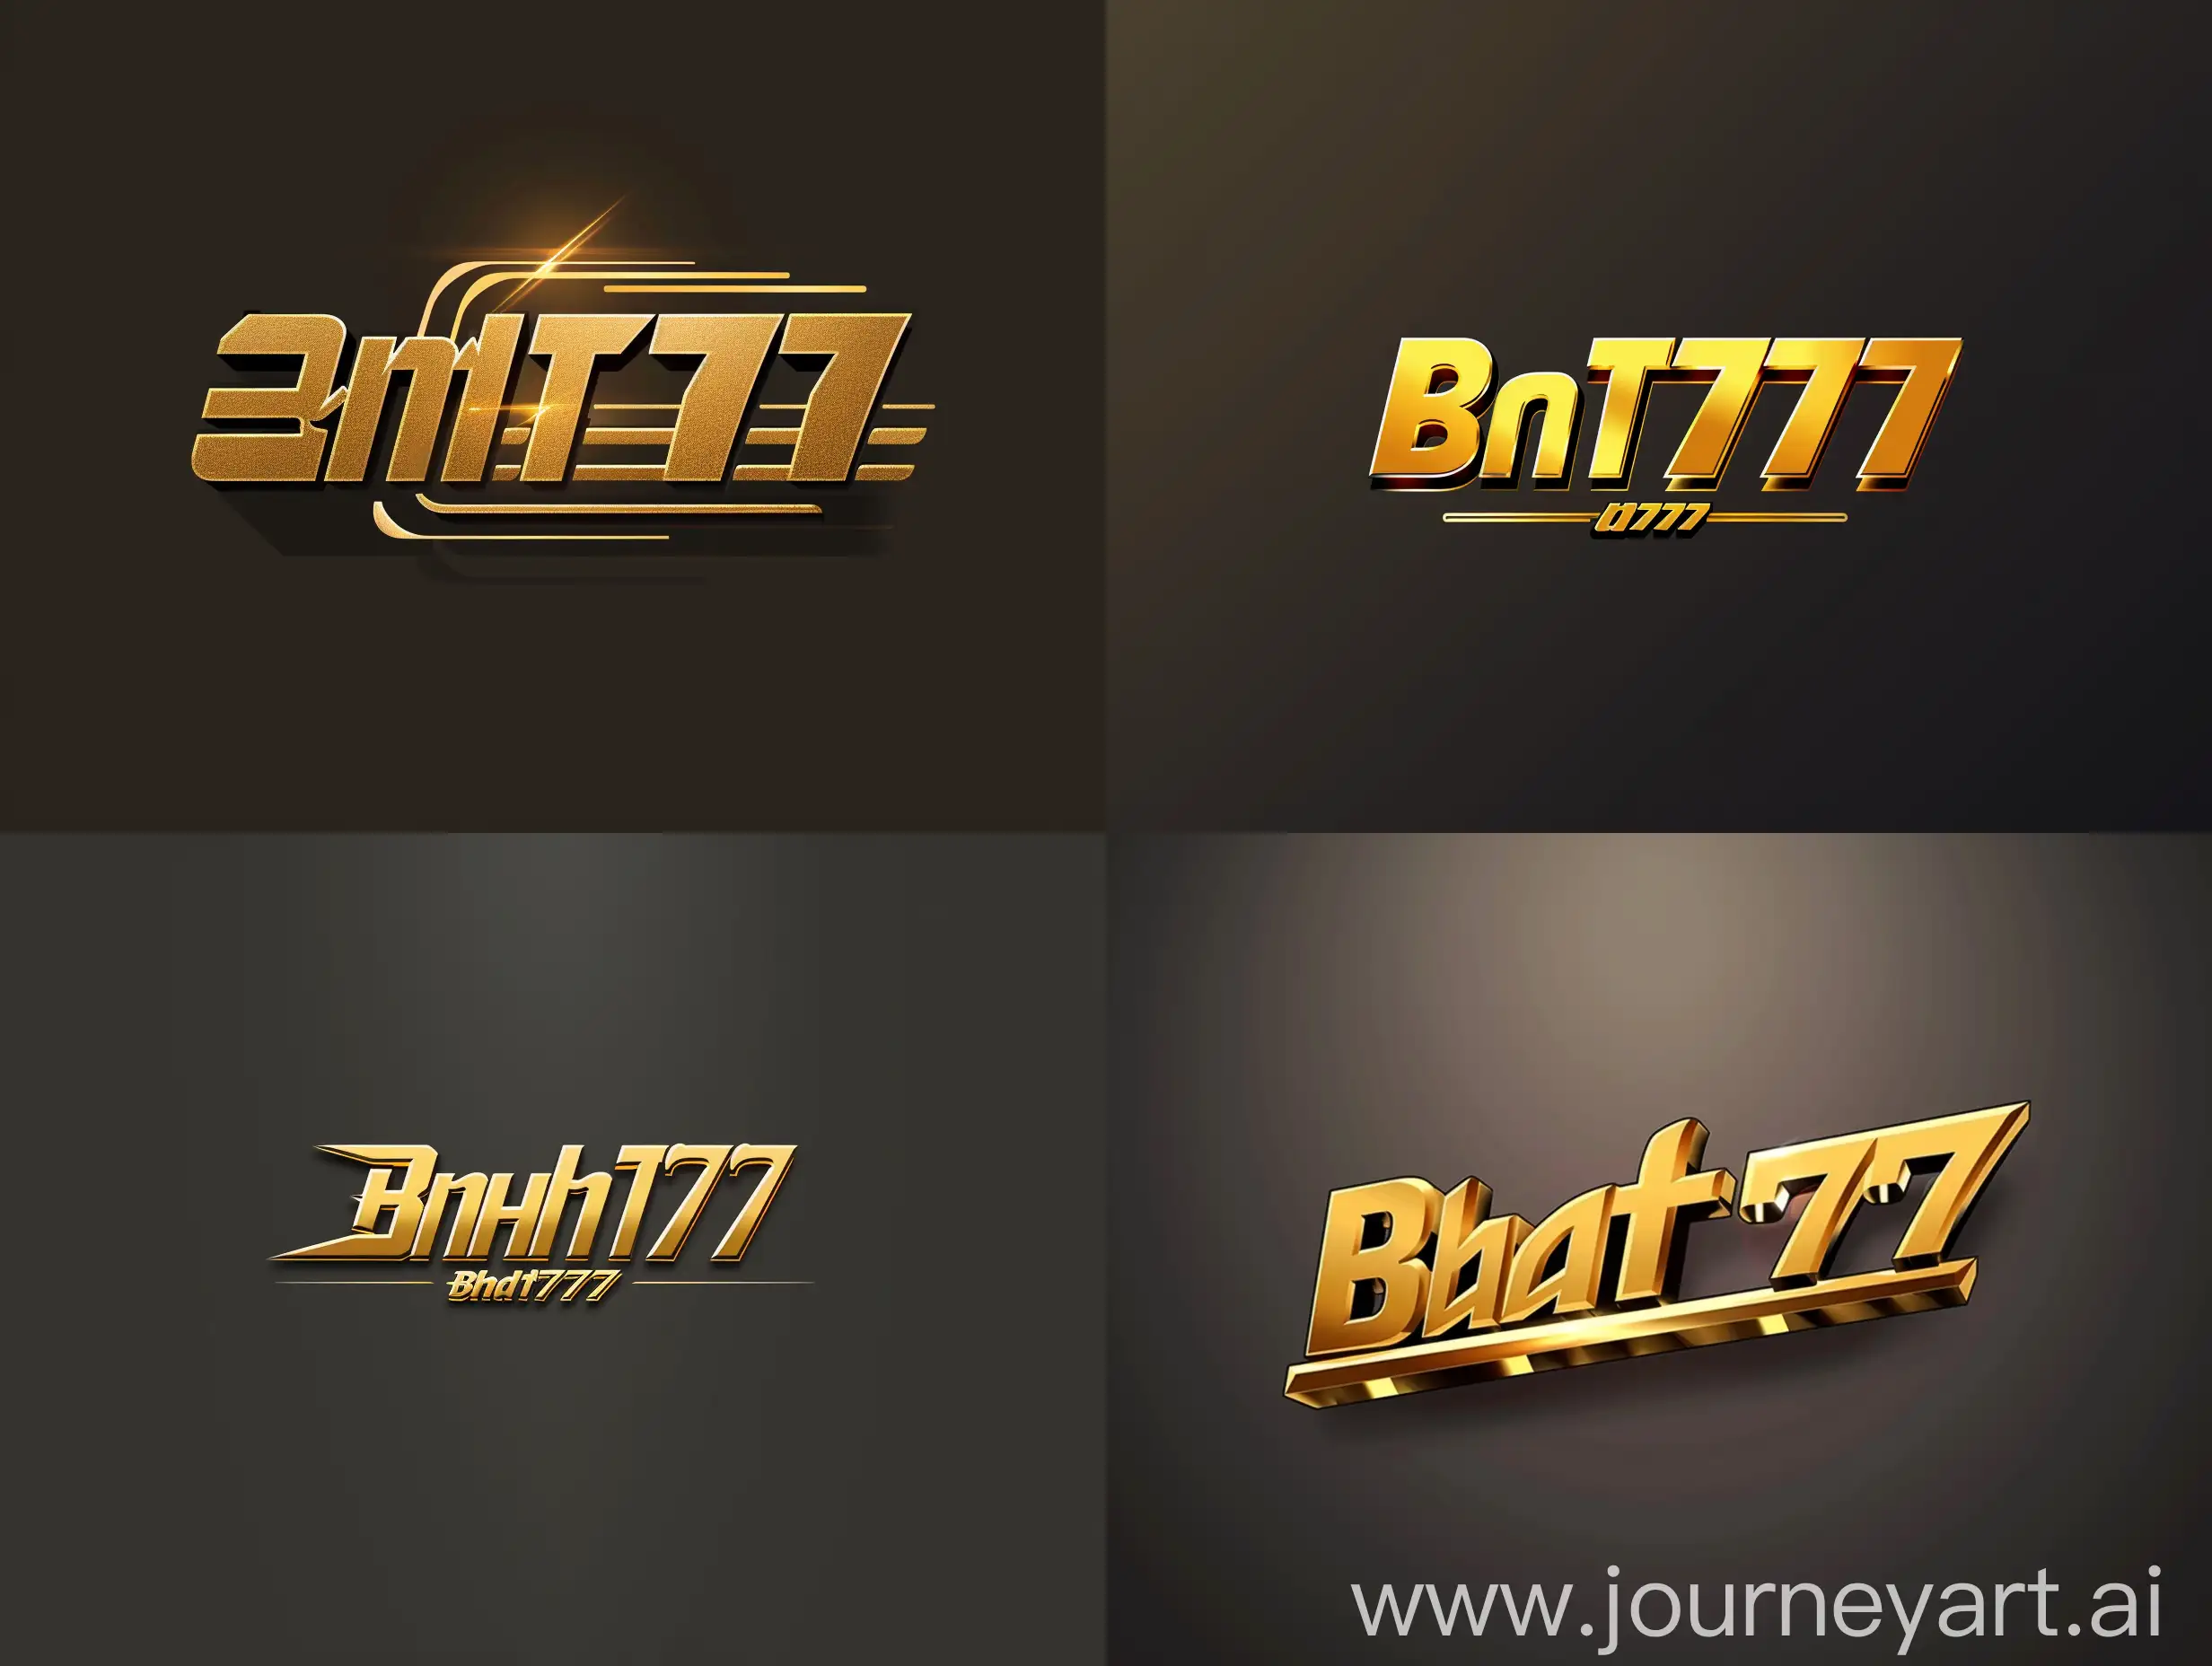 Design a sleek and modern business logo with the text 'baht777' in a golden hue. The background should be a simple dark tone to highlight the gold text, ensuring the overall appearance is upscale and easily recognizable. The font should be bold or semi-bold, with a contemporary feel, suitable for an online platform logo. Avoid any intricate patterns or graphic elements to maintain the logo's professionalism and clarity.